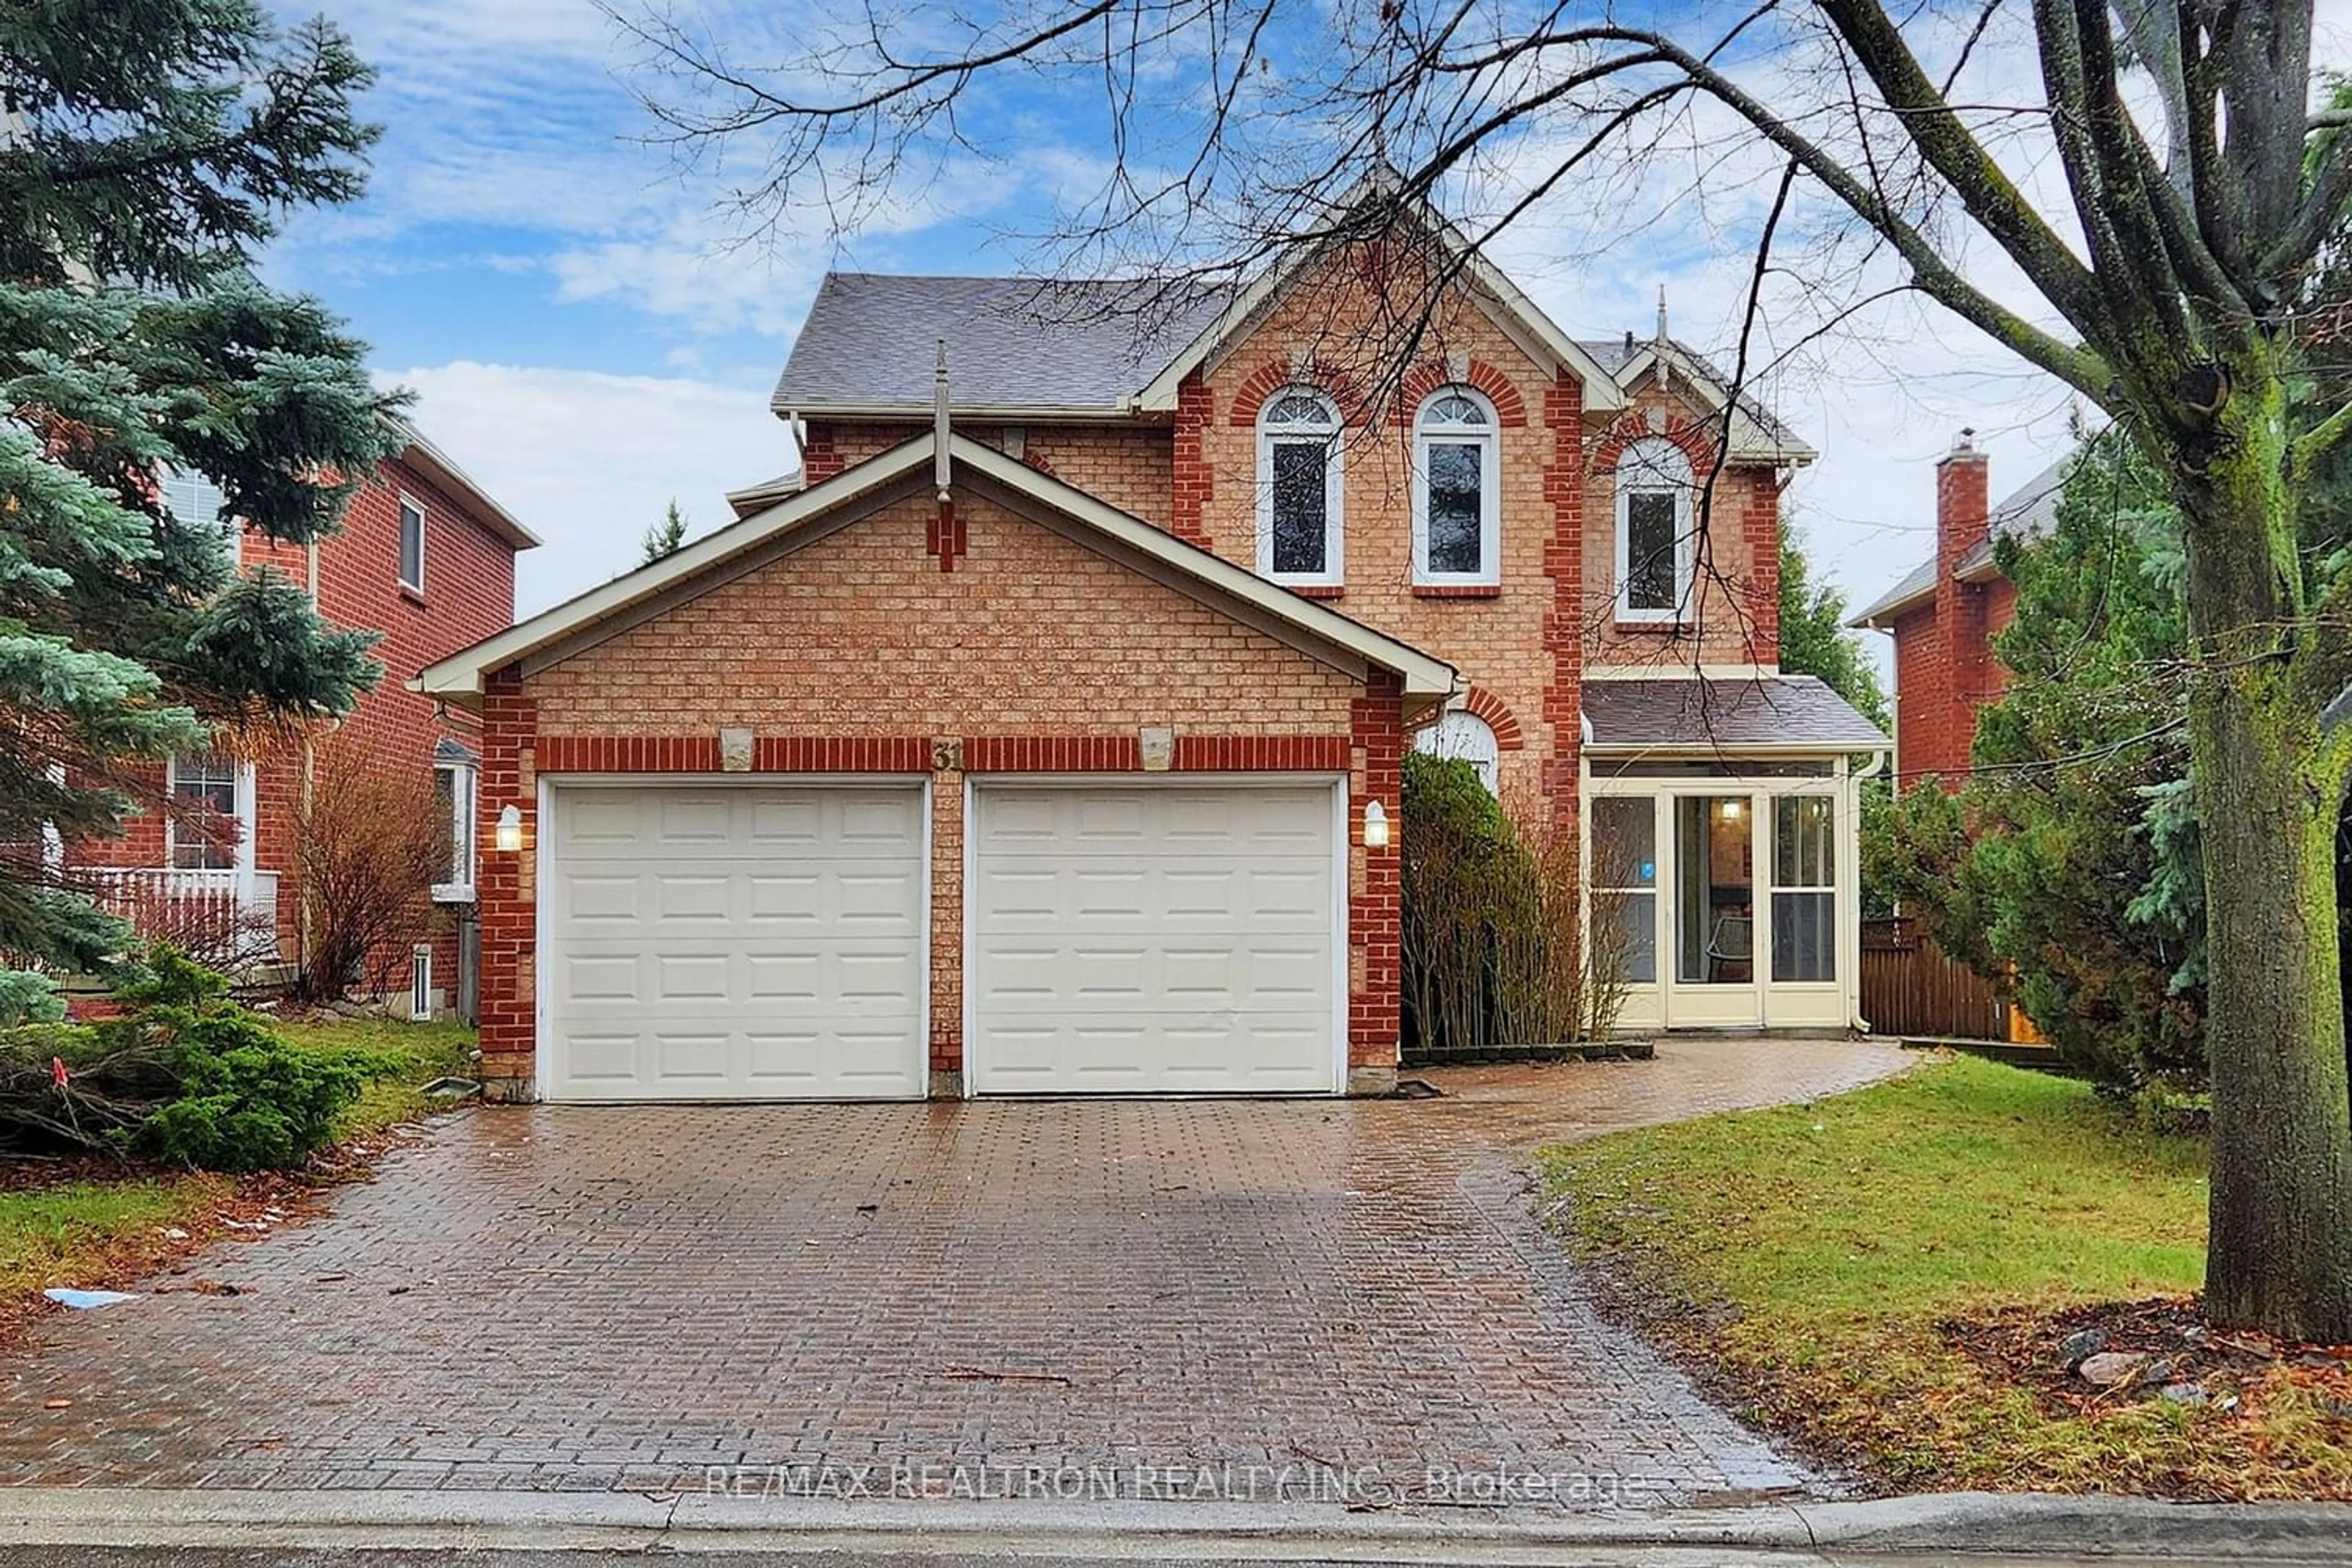 Home with brick exterior material for 31 Cavalry Tr, Markham Ontario L3R 9H3